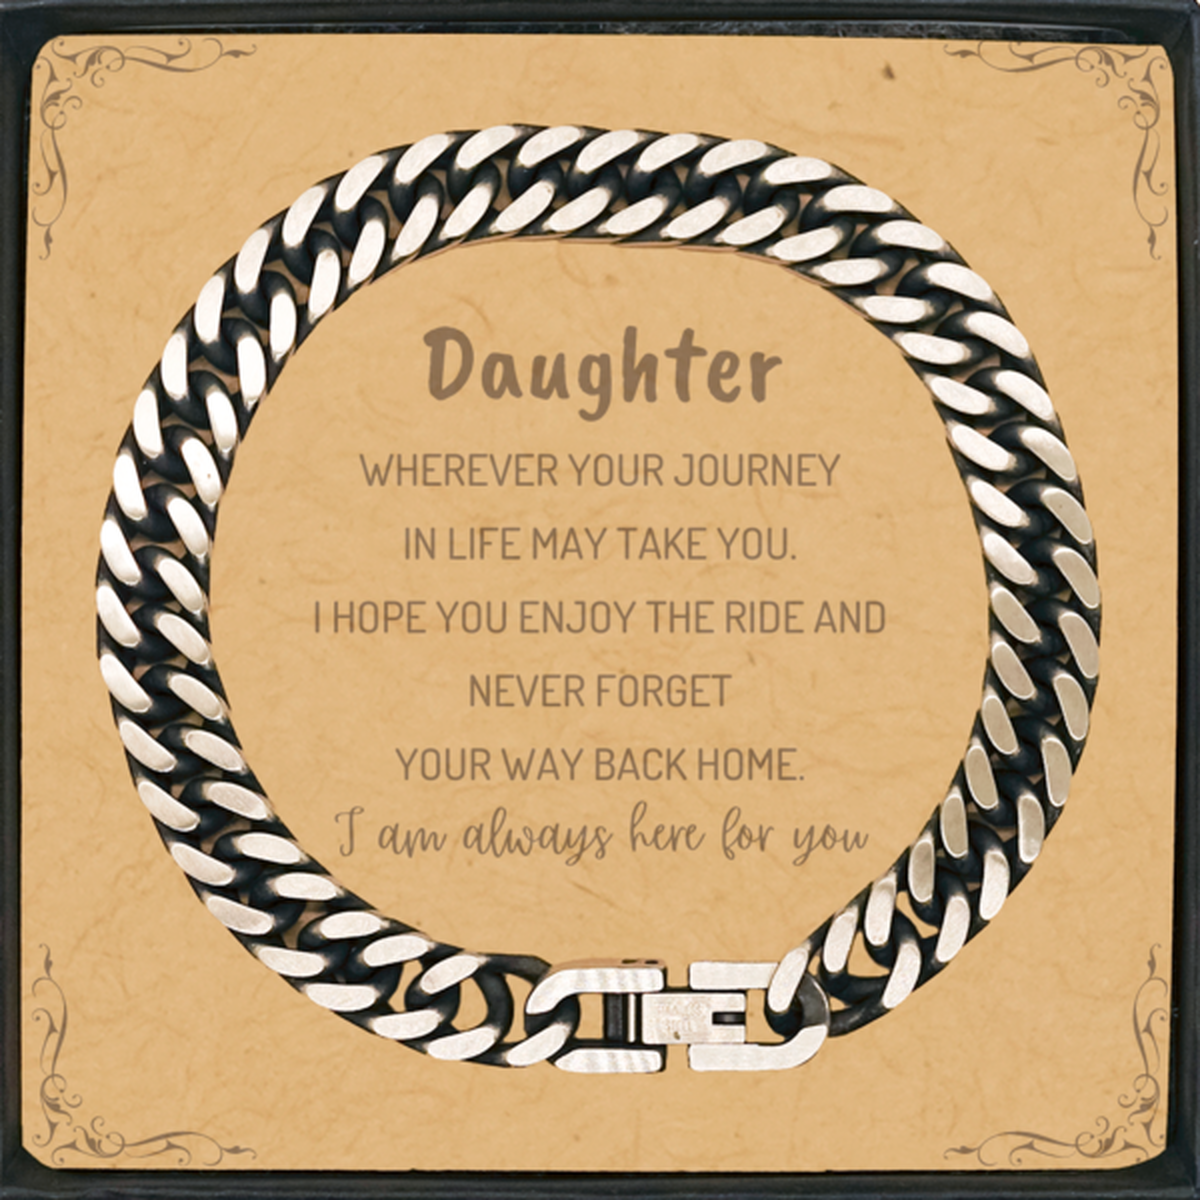 Daughter wherever your journey in life may take you, I am always here for you Daughter Cuban Link Chain Bracelet, Awesome Christmas Gifts For Daughter Message Card, Daughter Birthday Gifts for Men Women Family Loved One